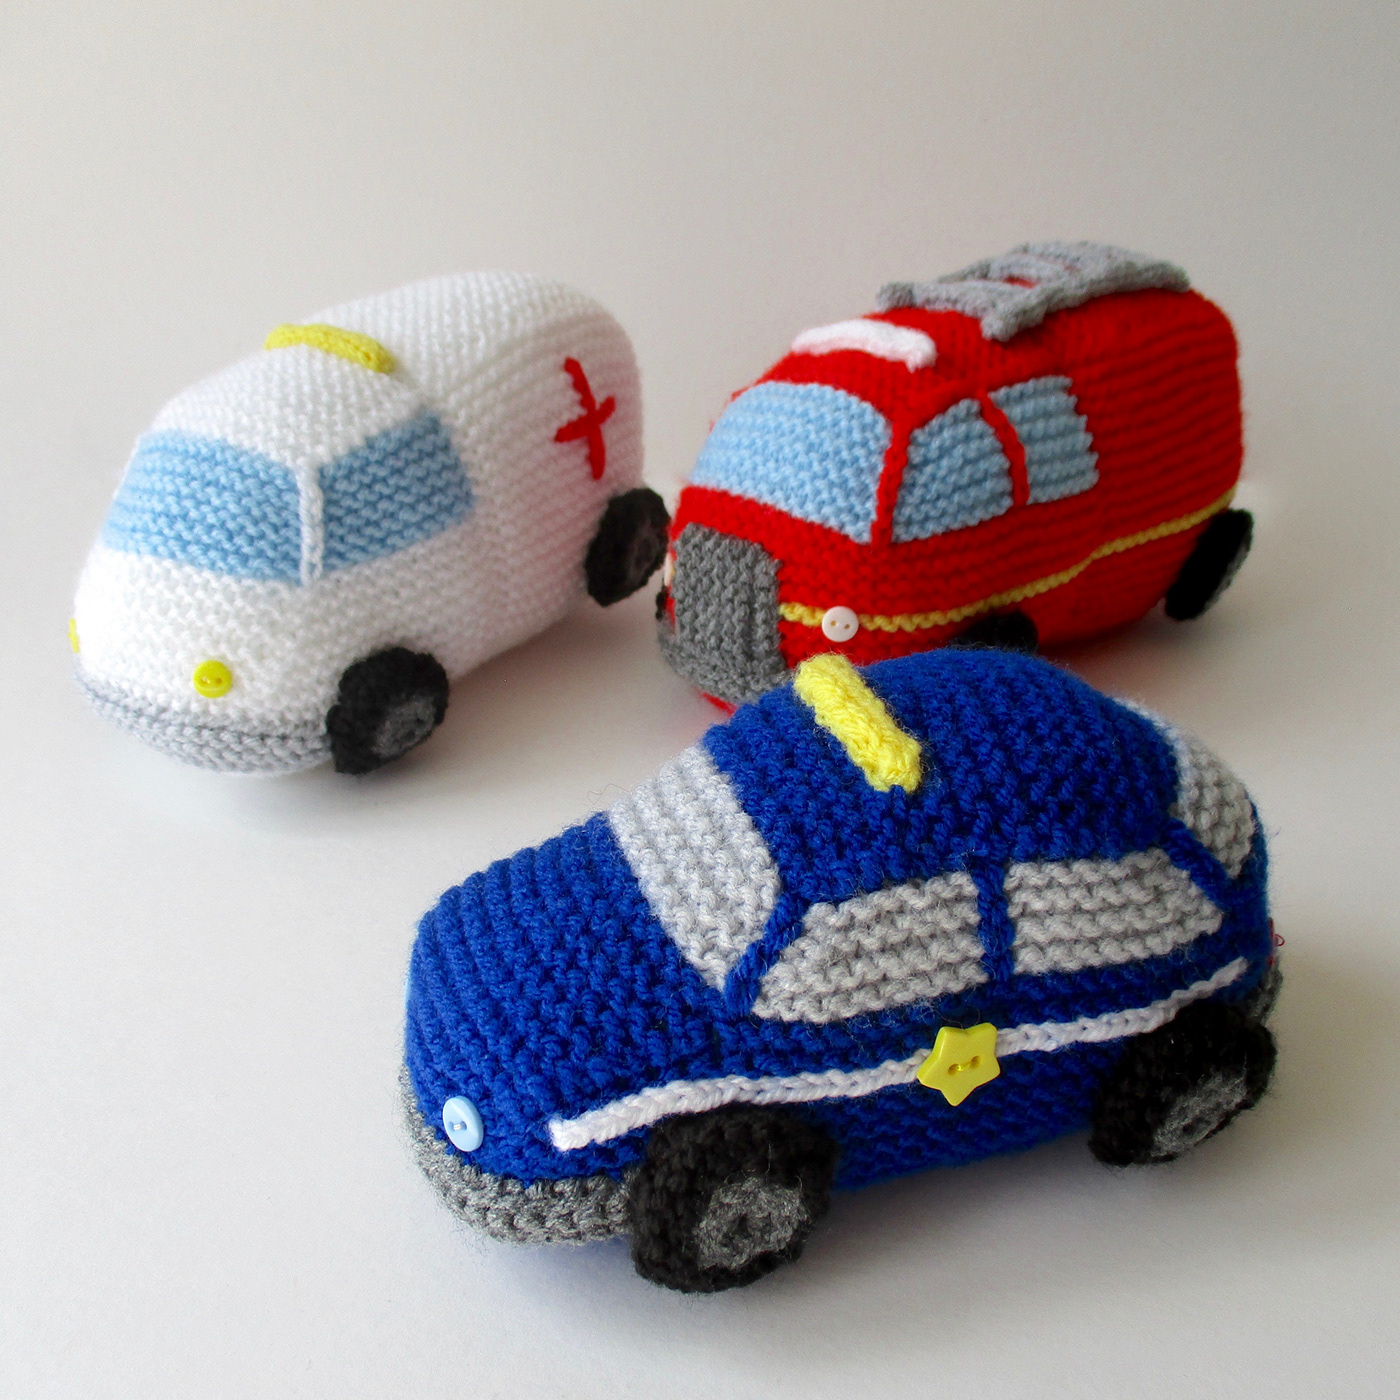 Emergency Vehicles Transport Knitted toys knitters handmade knitted cars toys for boys